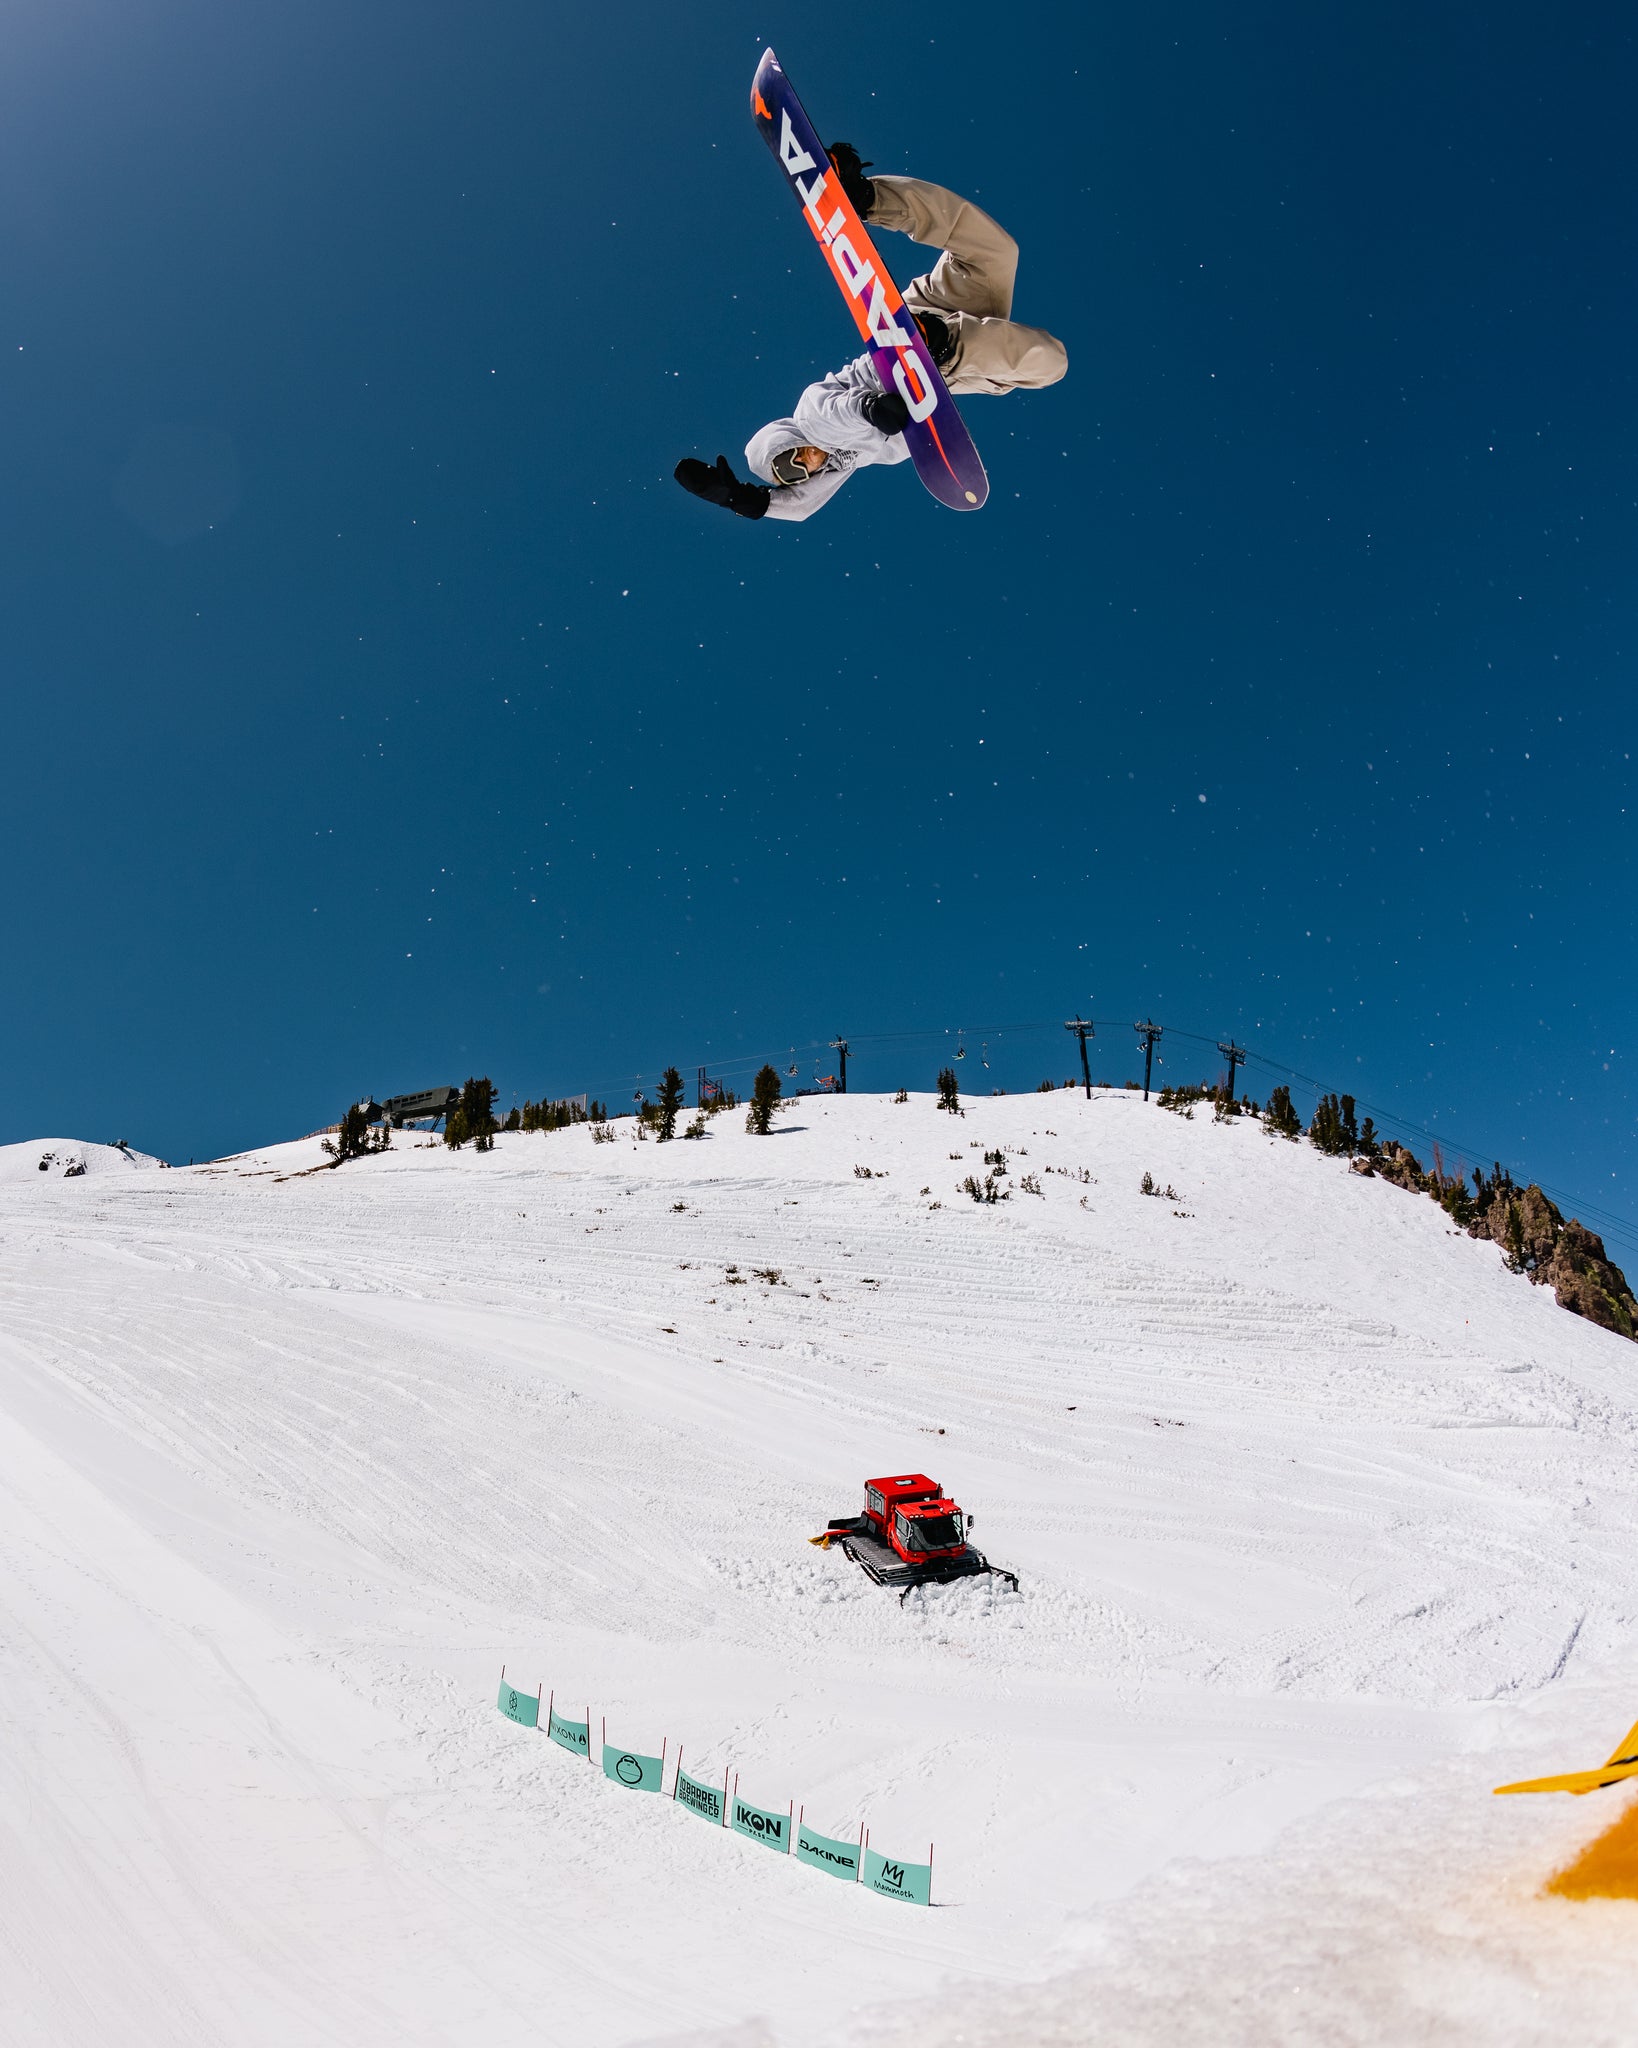 Flow state on board at World Quarters 2022 // p: Andrew Miller